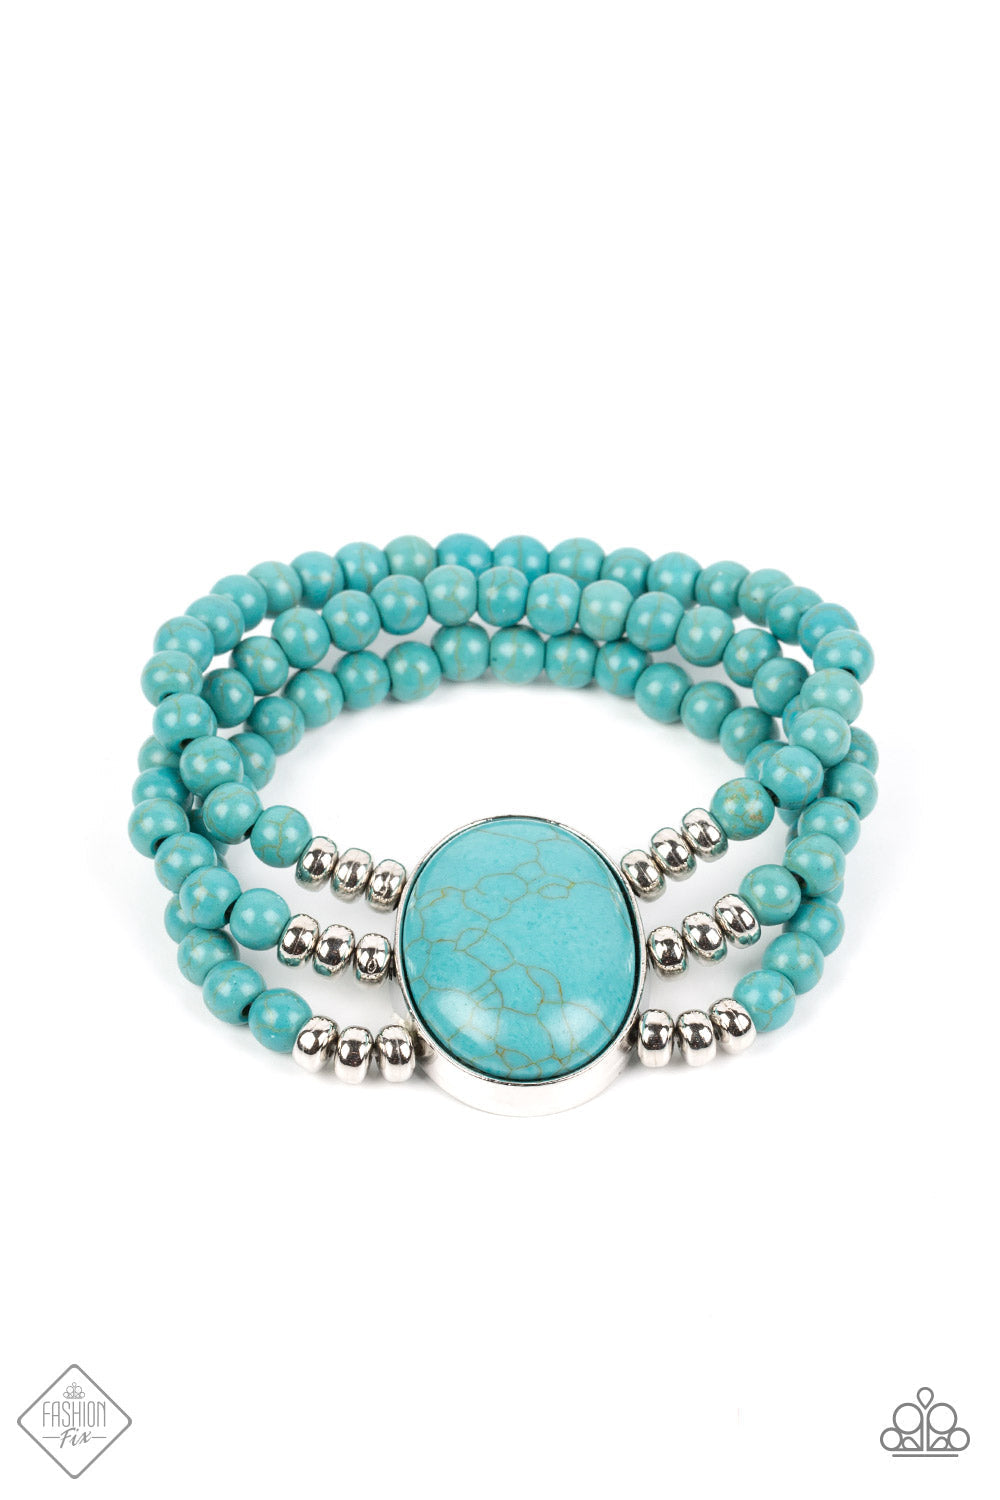 Stone Pools - Blue Turquoise Stone Bracelet Paparazzi Accessories – Bejeweled Accessories By Kristie